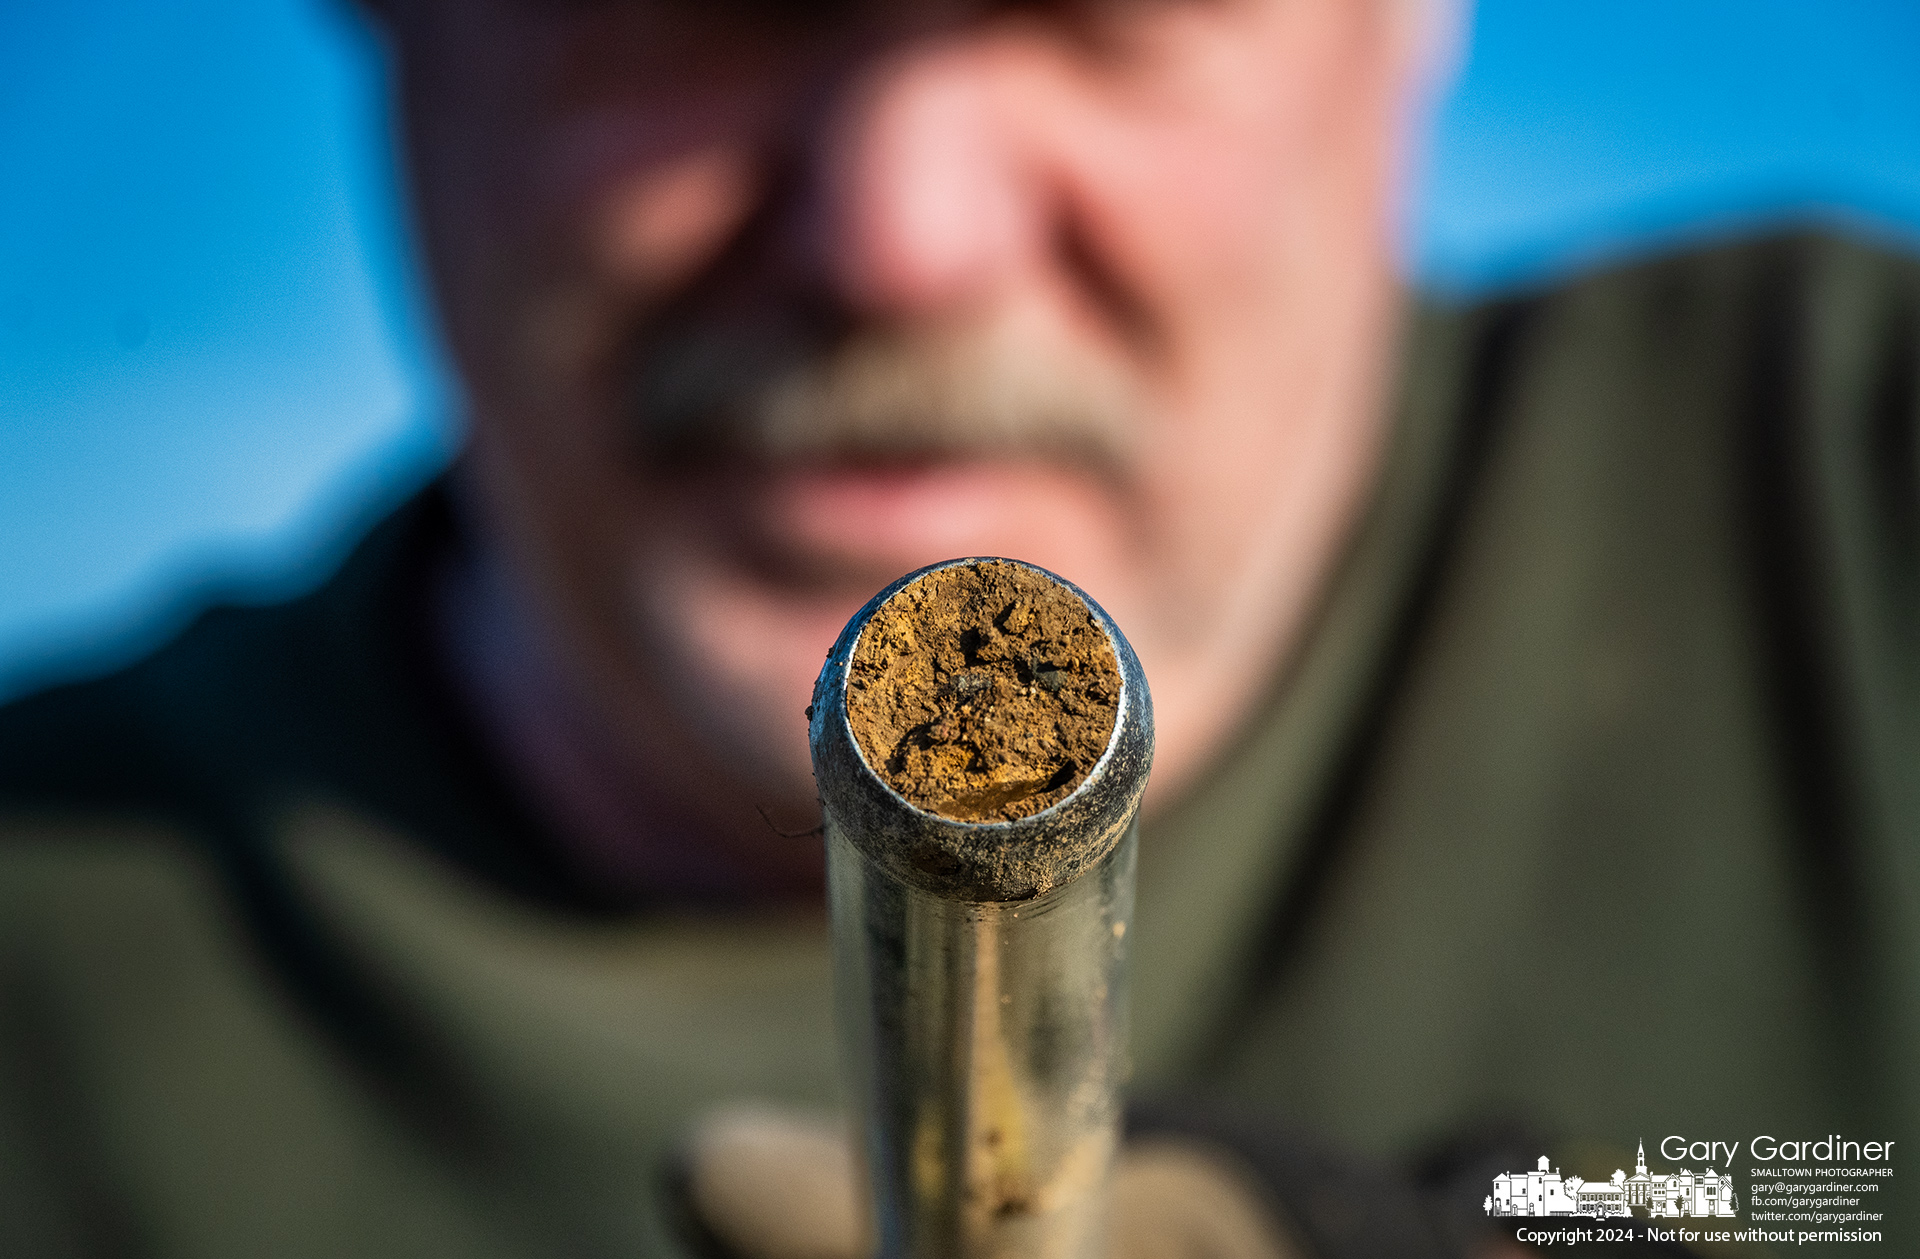 Farmer Kevin Scott displays a soil sample bored from a field off Cooper and Collegeview Roads where after having the sample tested will be planting a crop as soon as early April depending on soil and weather conditions. My Final Photo for February 26, 2024.